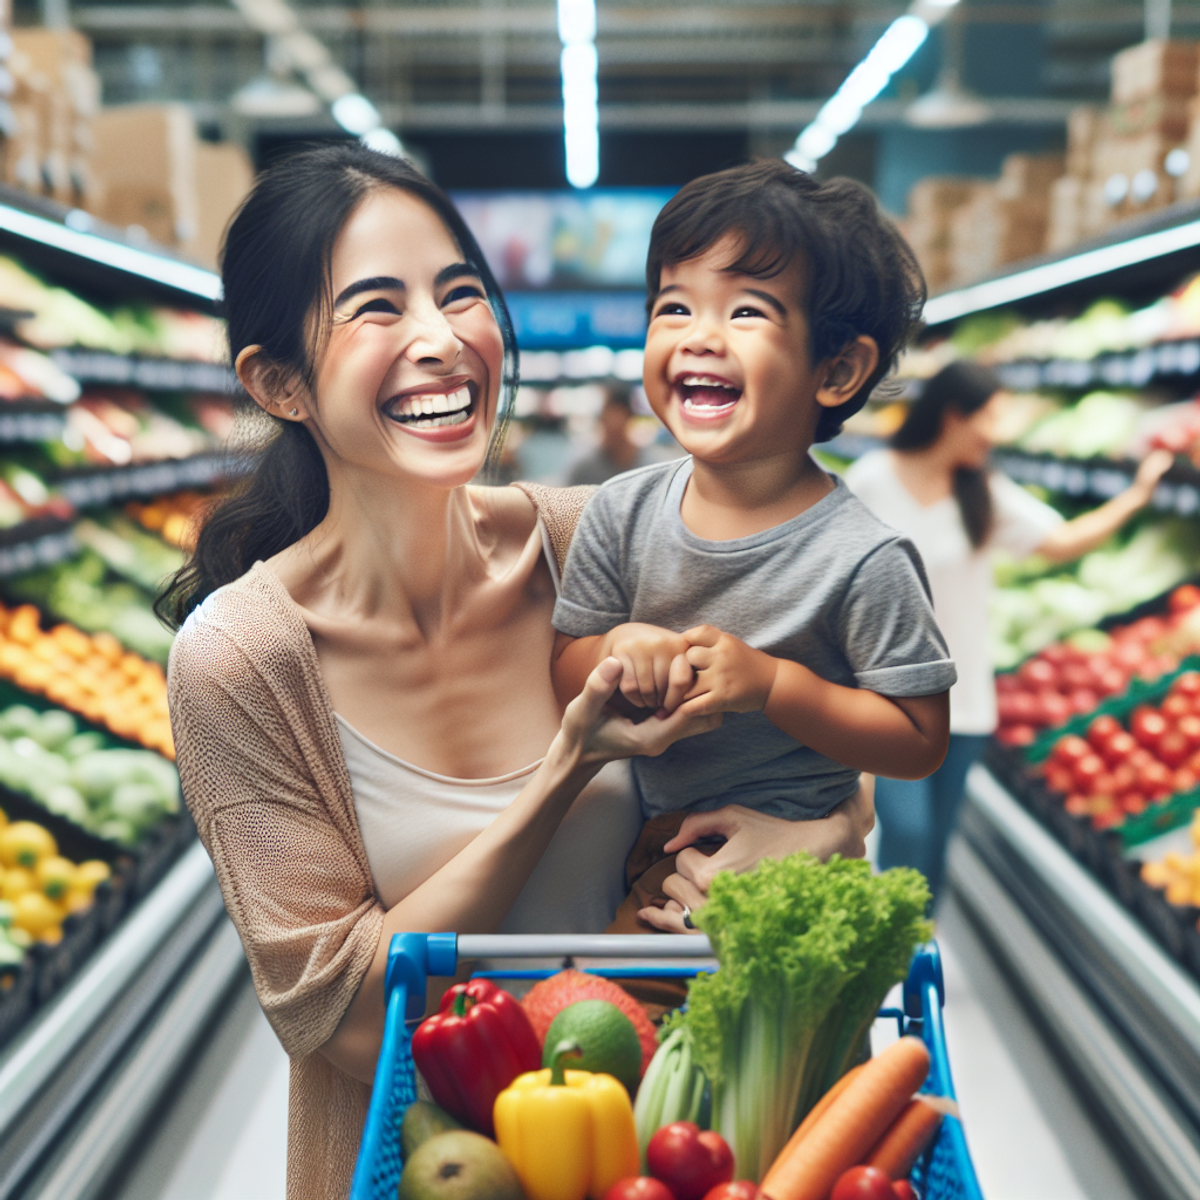 A smiling Asian woman and a Hispanic toddler holding hands while grocery shopping in a vibrant supermarket.